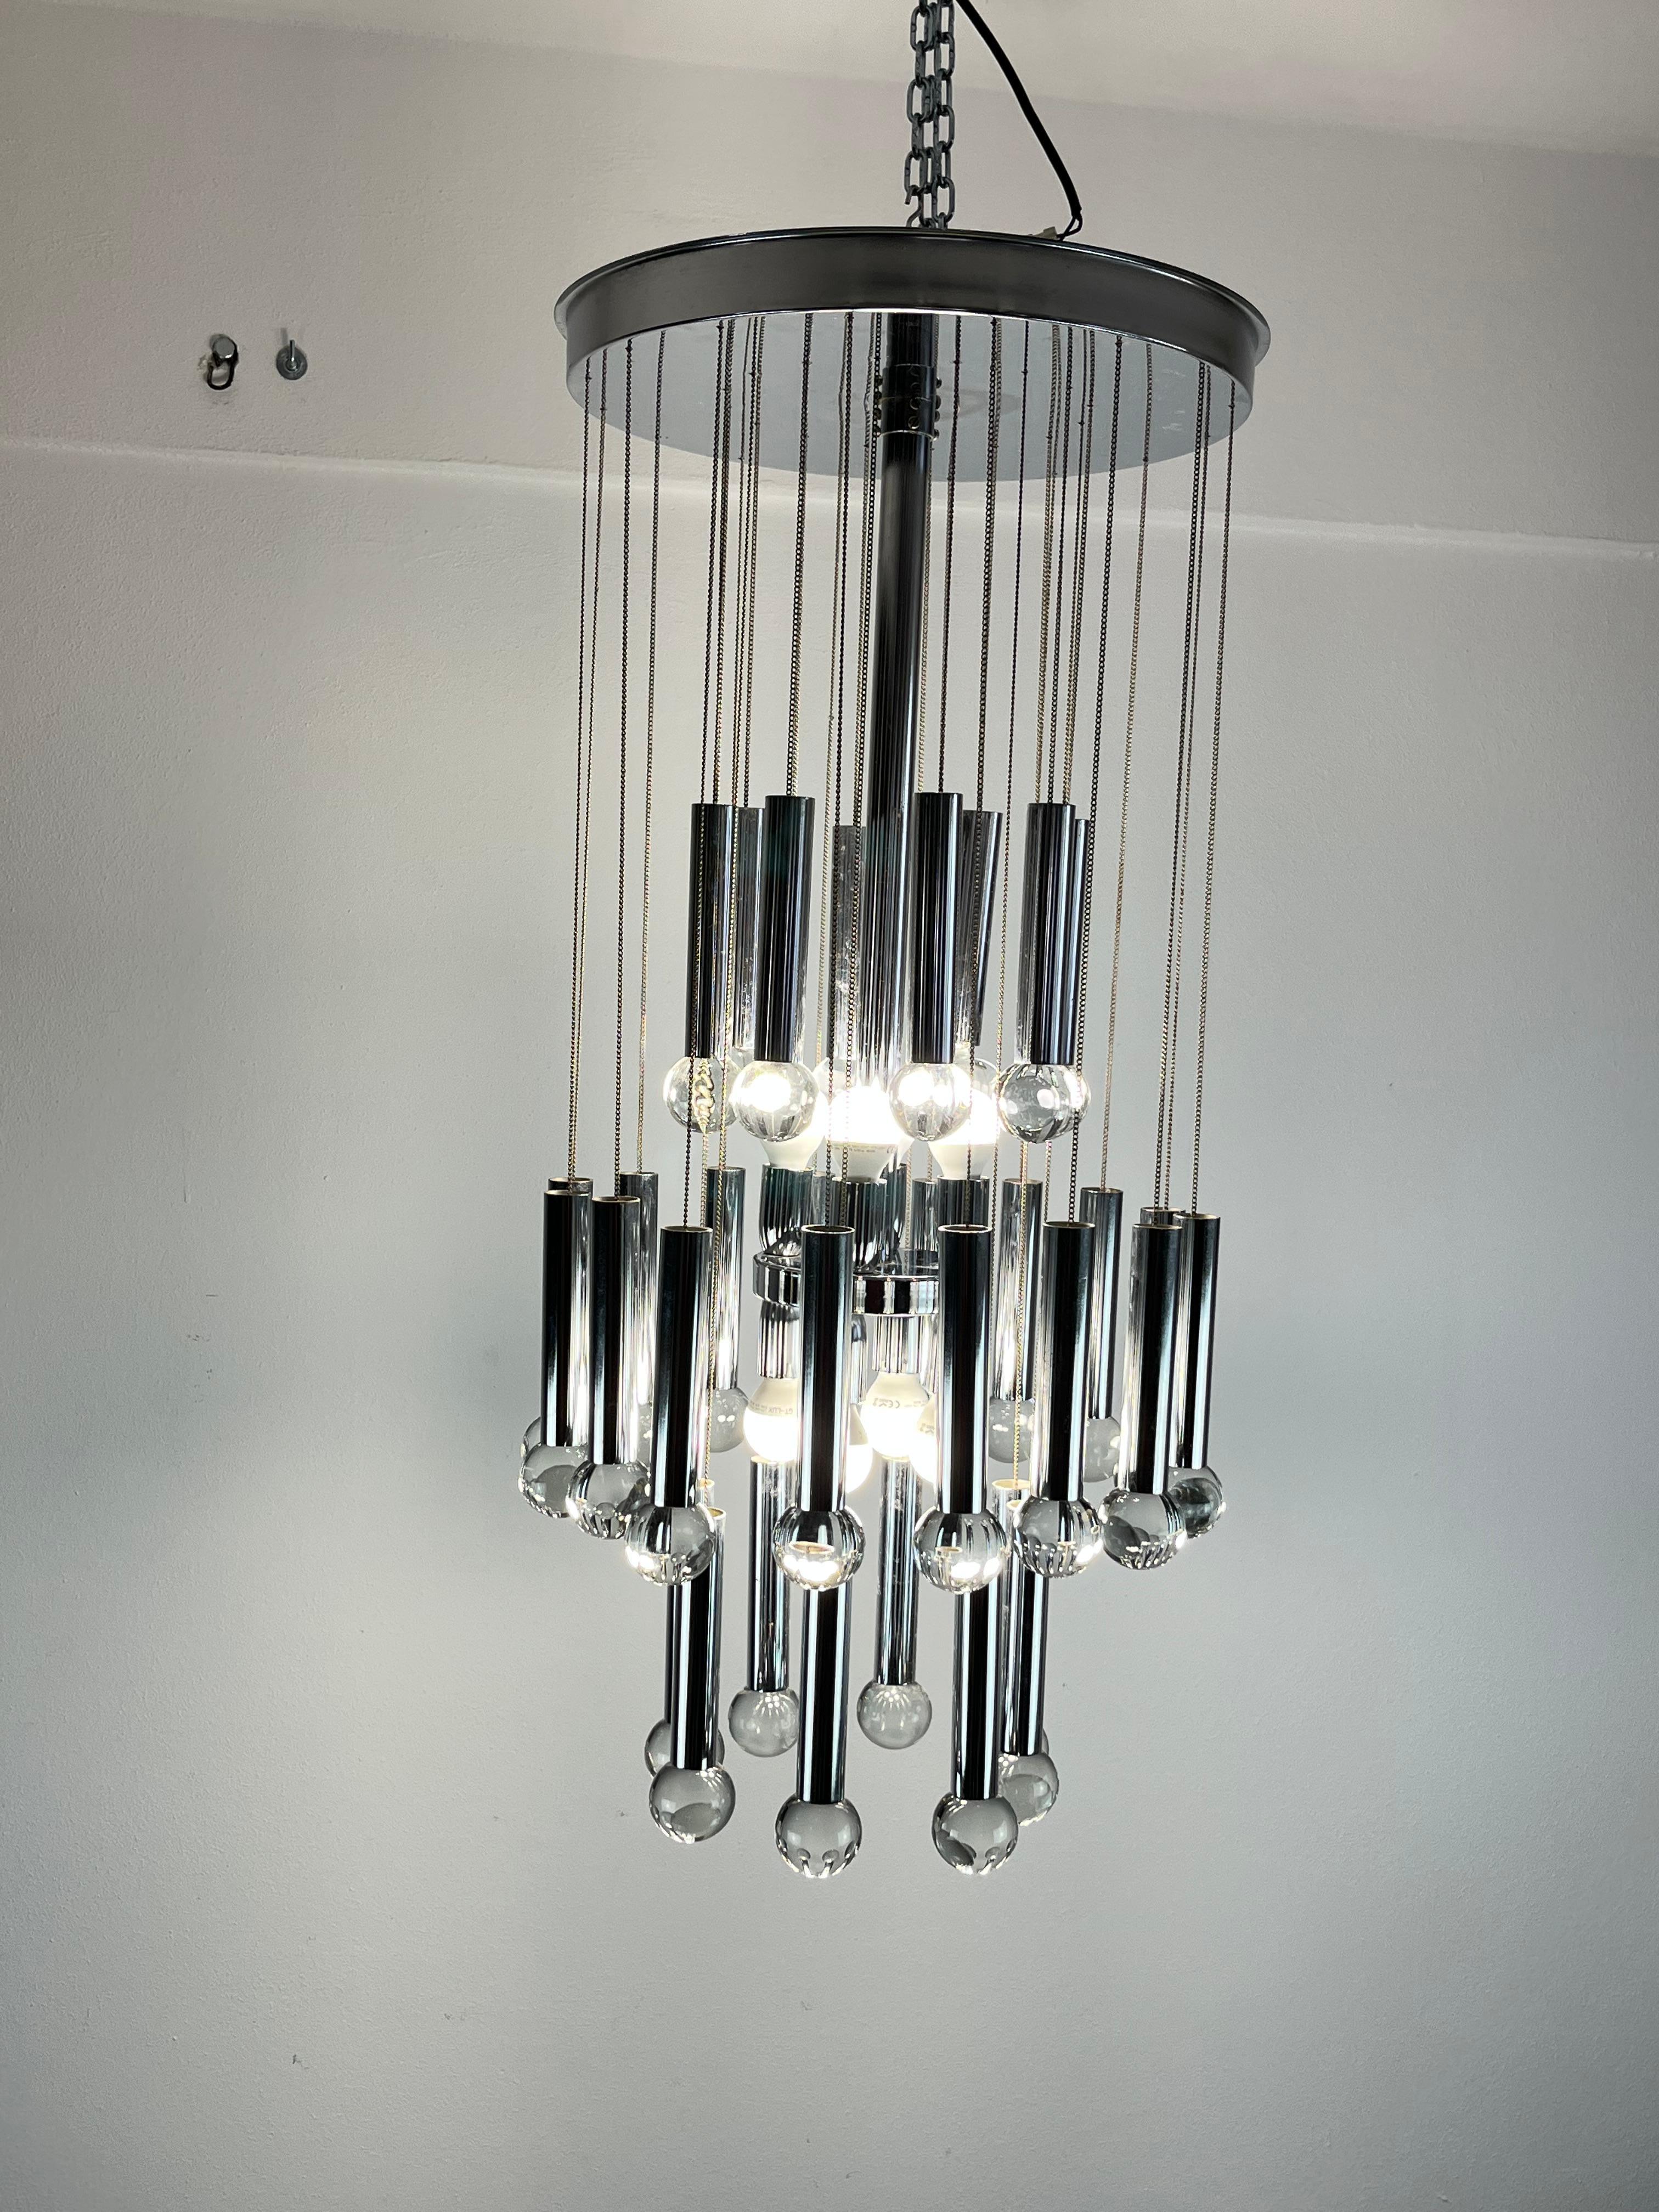 Eight-light steel and glass chandelier by Gaetano Sciolari, Italy, 1970s.
Small signs of wear, but overall in excellent condition

From Wikipedia, the free encyclopedia
Angelo Gaetano Sciolari (1927-1994) was the owner of Sciolari Lighting and